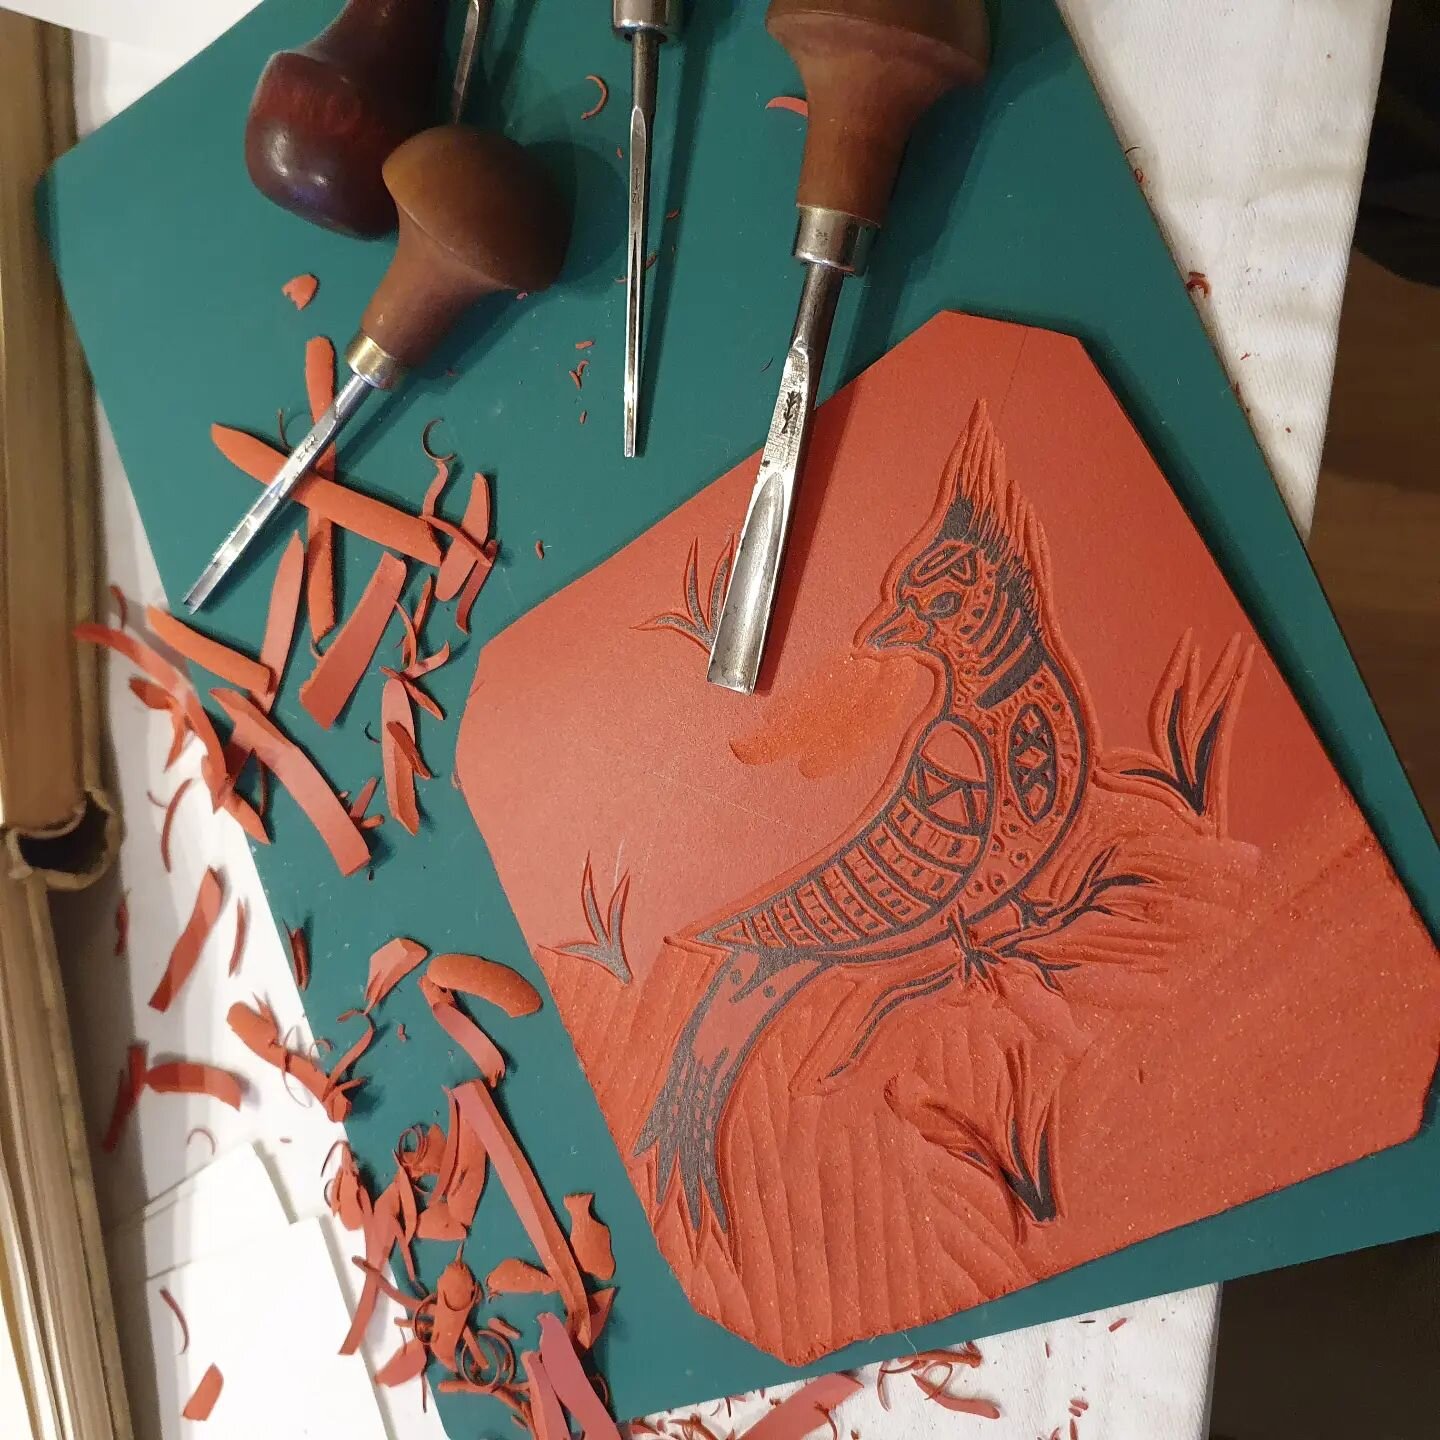 Working on some printed curtains for the new studio, here is the lino block being cut ready for printing. 

We are busy getting the studio ready for its opening on the 17th of Feb, more details to follow. 

#printmaking #fabricprinting #linoprints #C